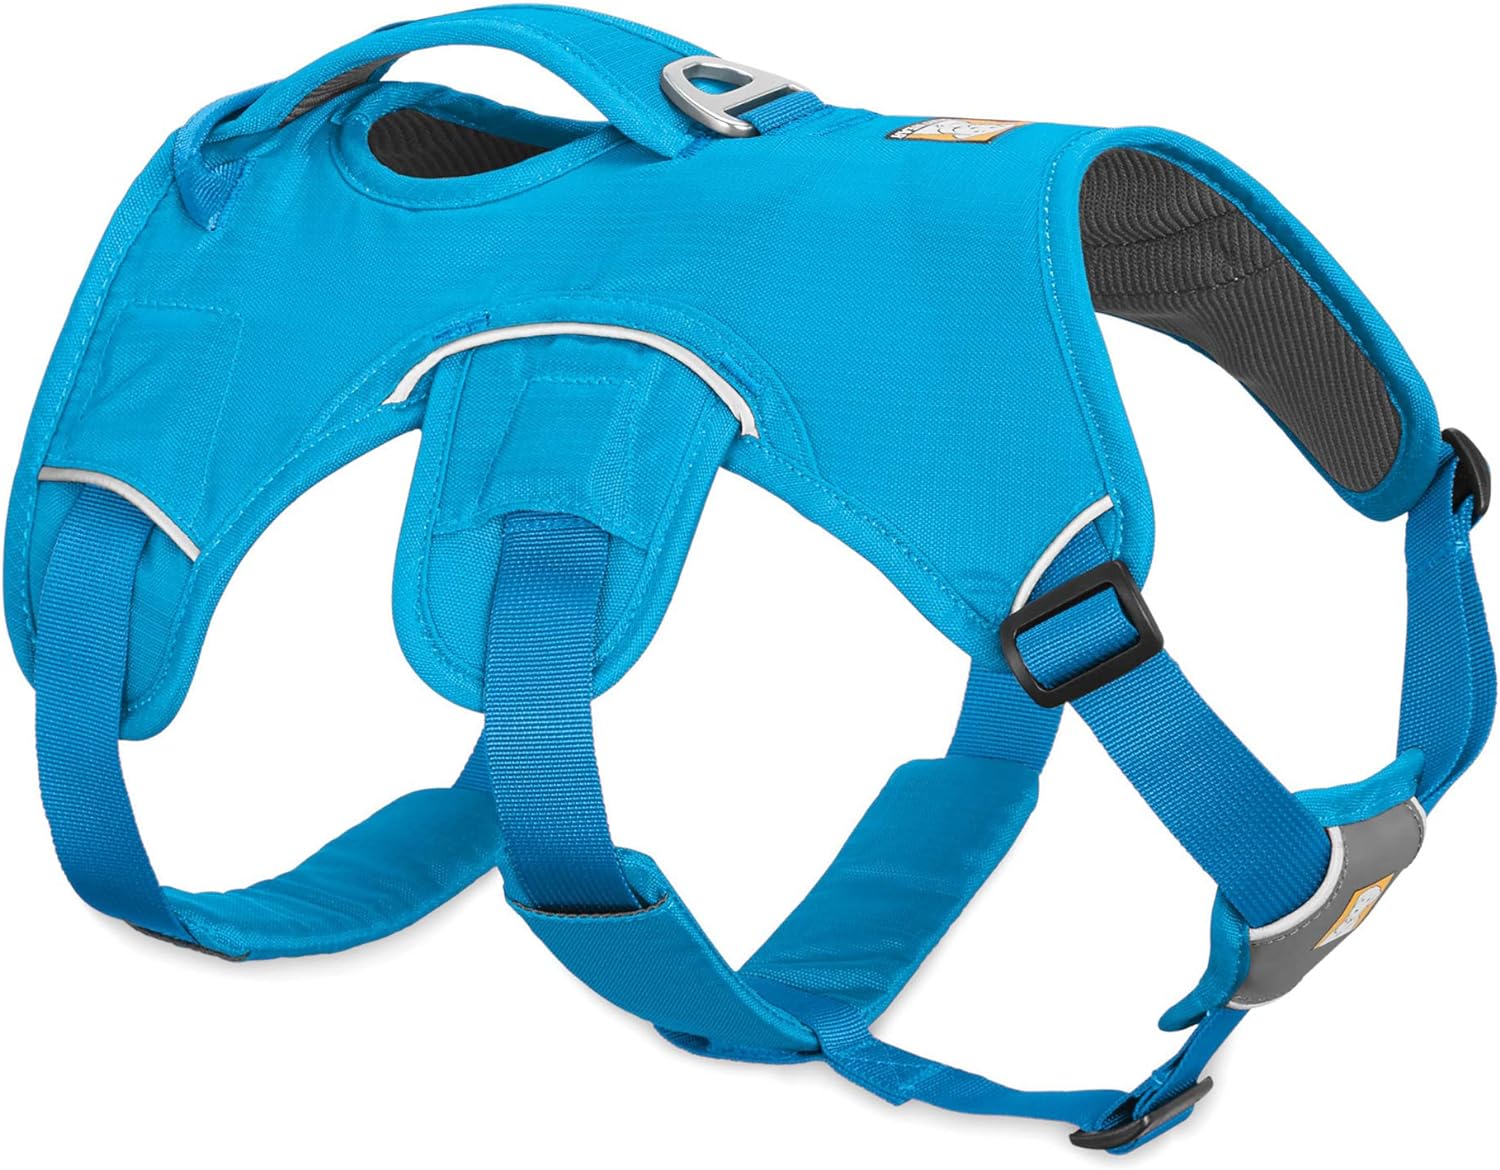 Ruffwear, Web Master, Multi-Use Support Dog Harness, Hiking and Trail Running, Service and Working, Everyday Wear, Blue Dusk, Medium